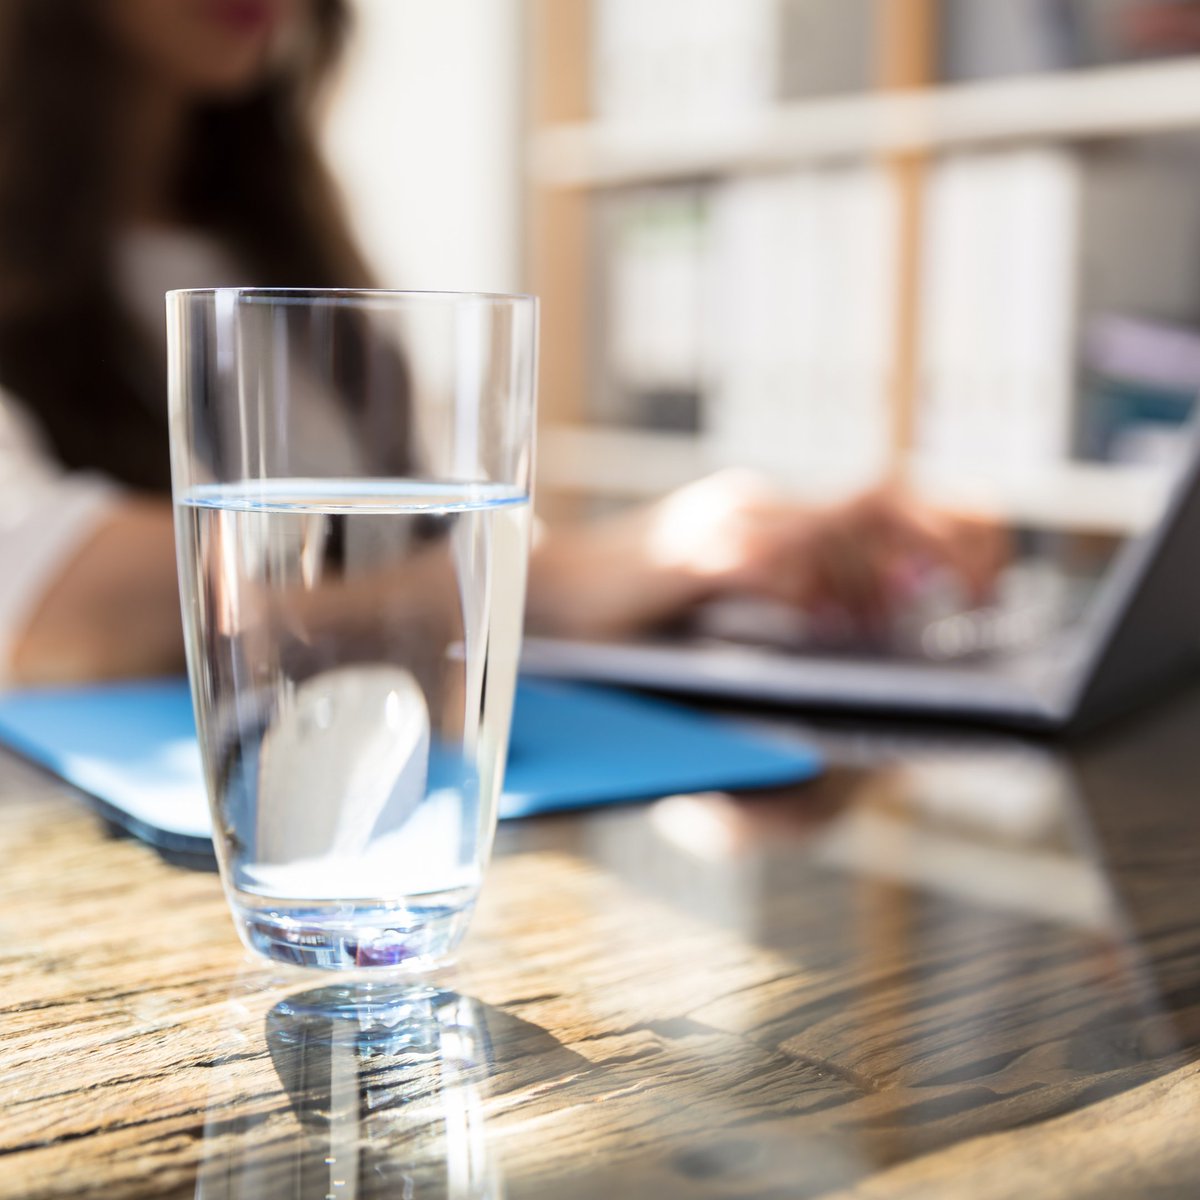 Hydration is key for boosting mood and productivity! Make sure to fill up on clean, accessible drinking water at the workplace to stay healthy, happy, and on top of your game!

#stonybrookwater #officehydration #productivityboost